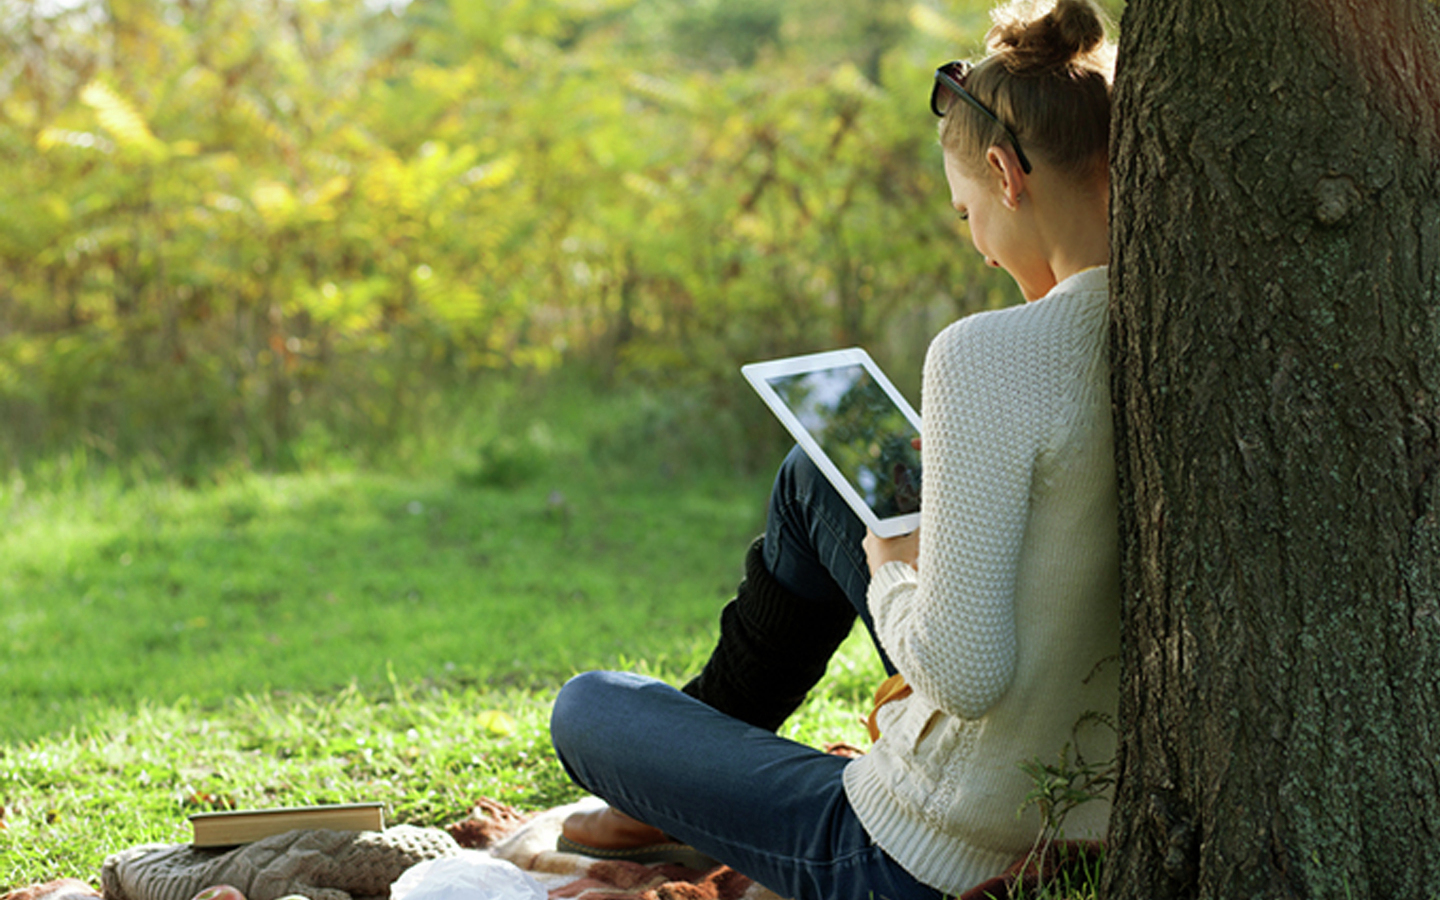 A woman sits in a park with an iPad